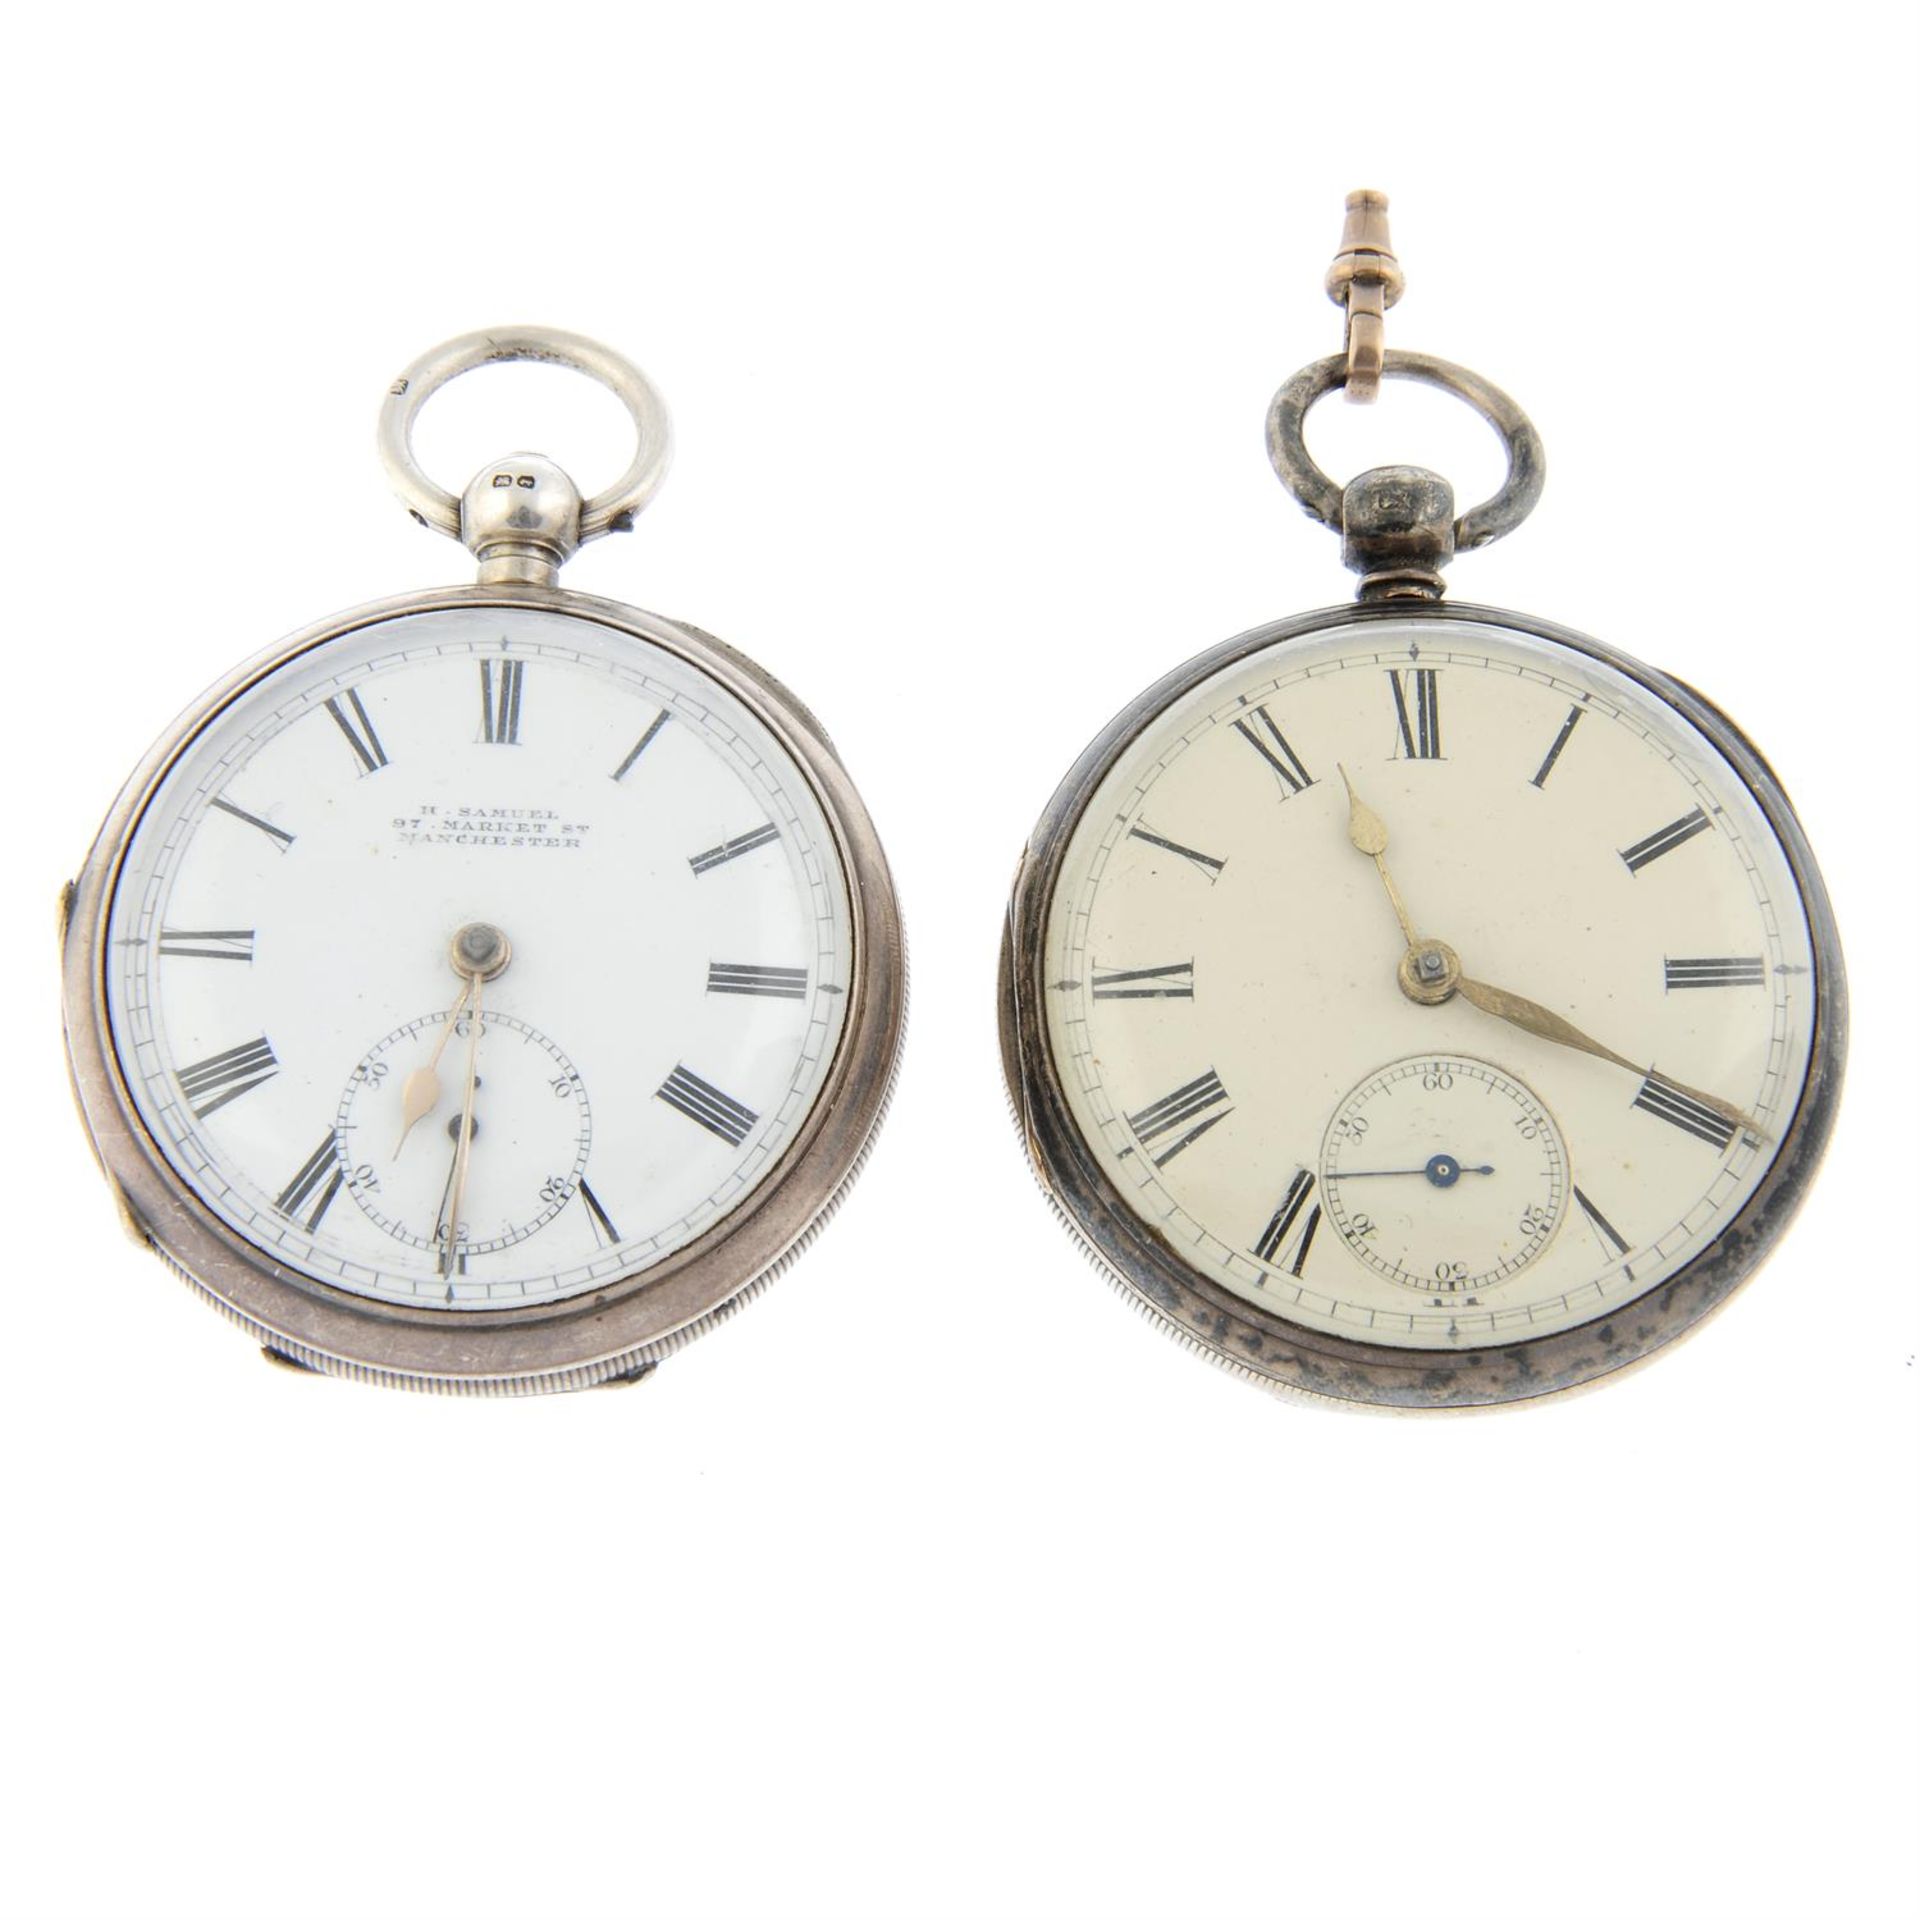 A silver open face pocket watch by H. Samuel (52mm) with a silver pocket watch.